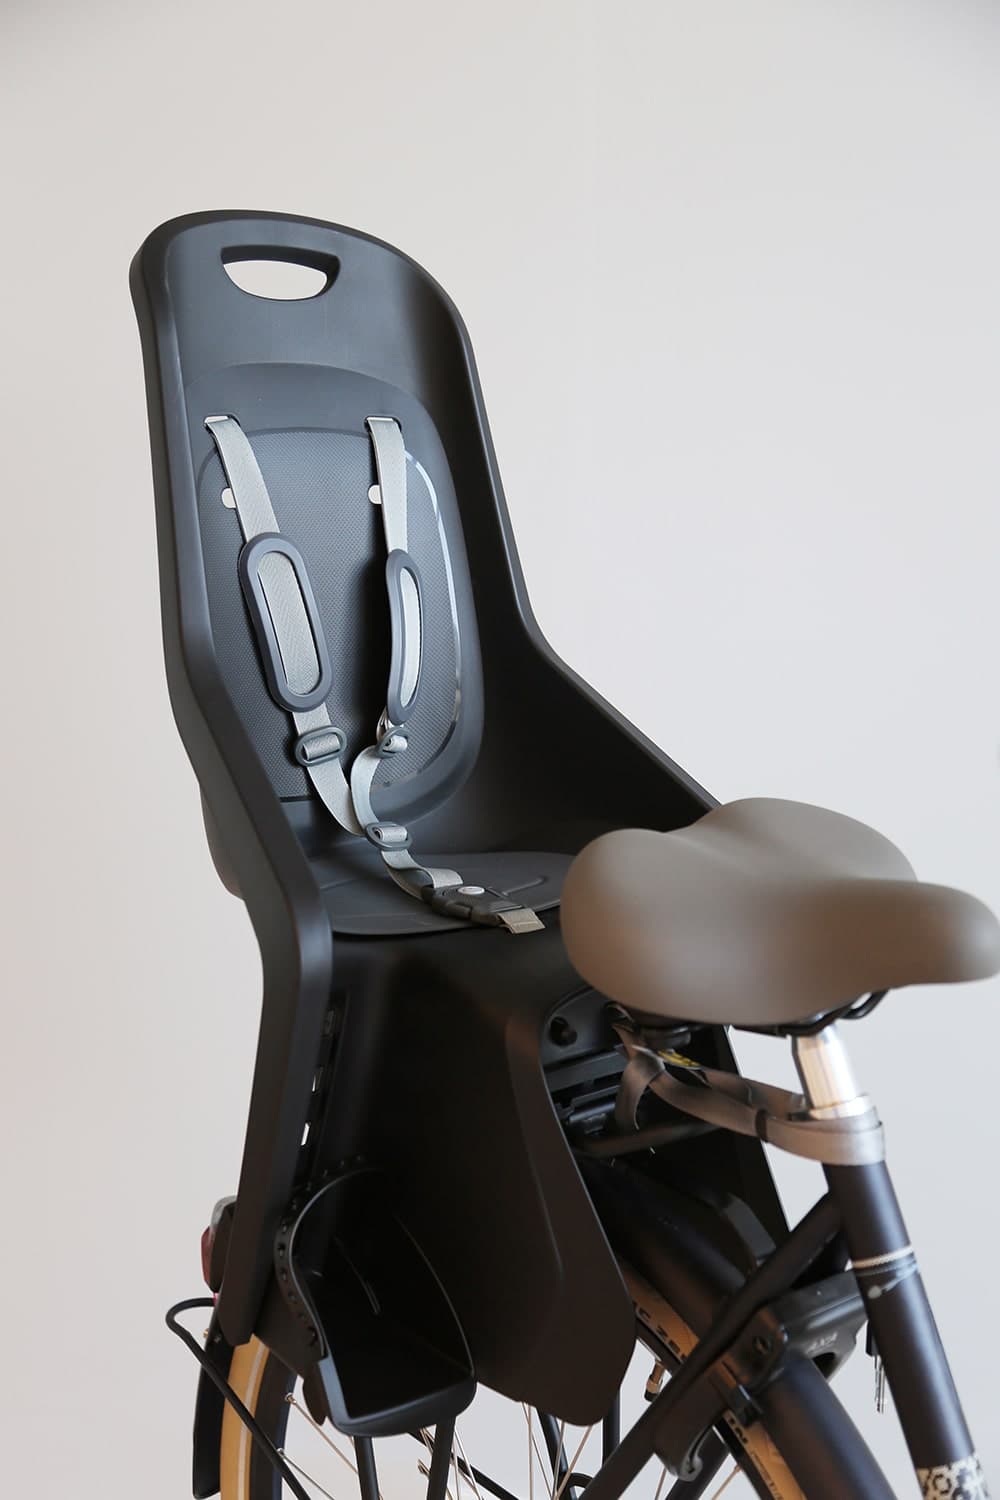 MIK takes the next step with MIK HD and child seats